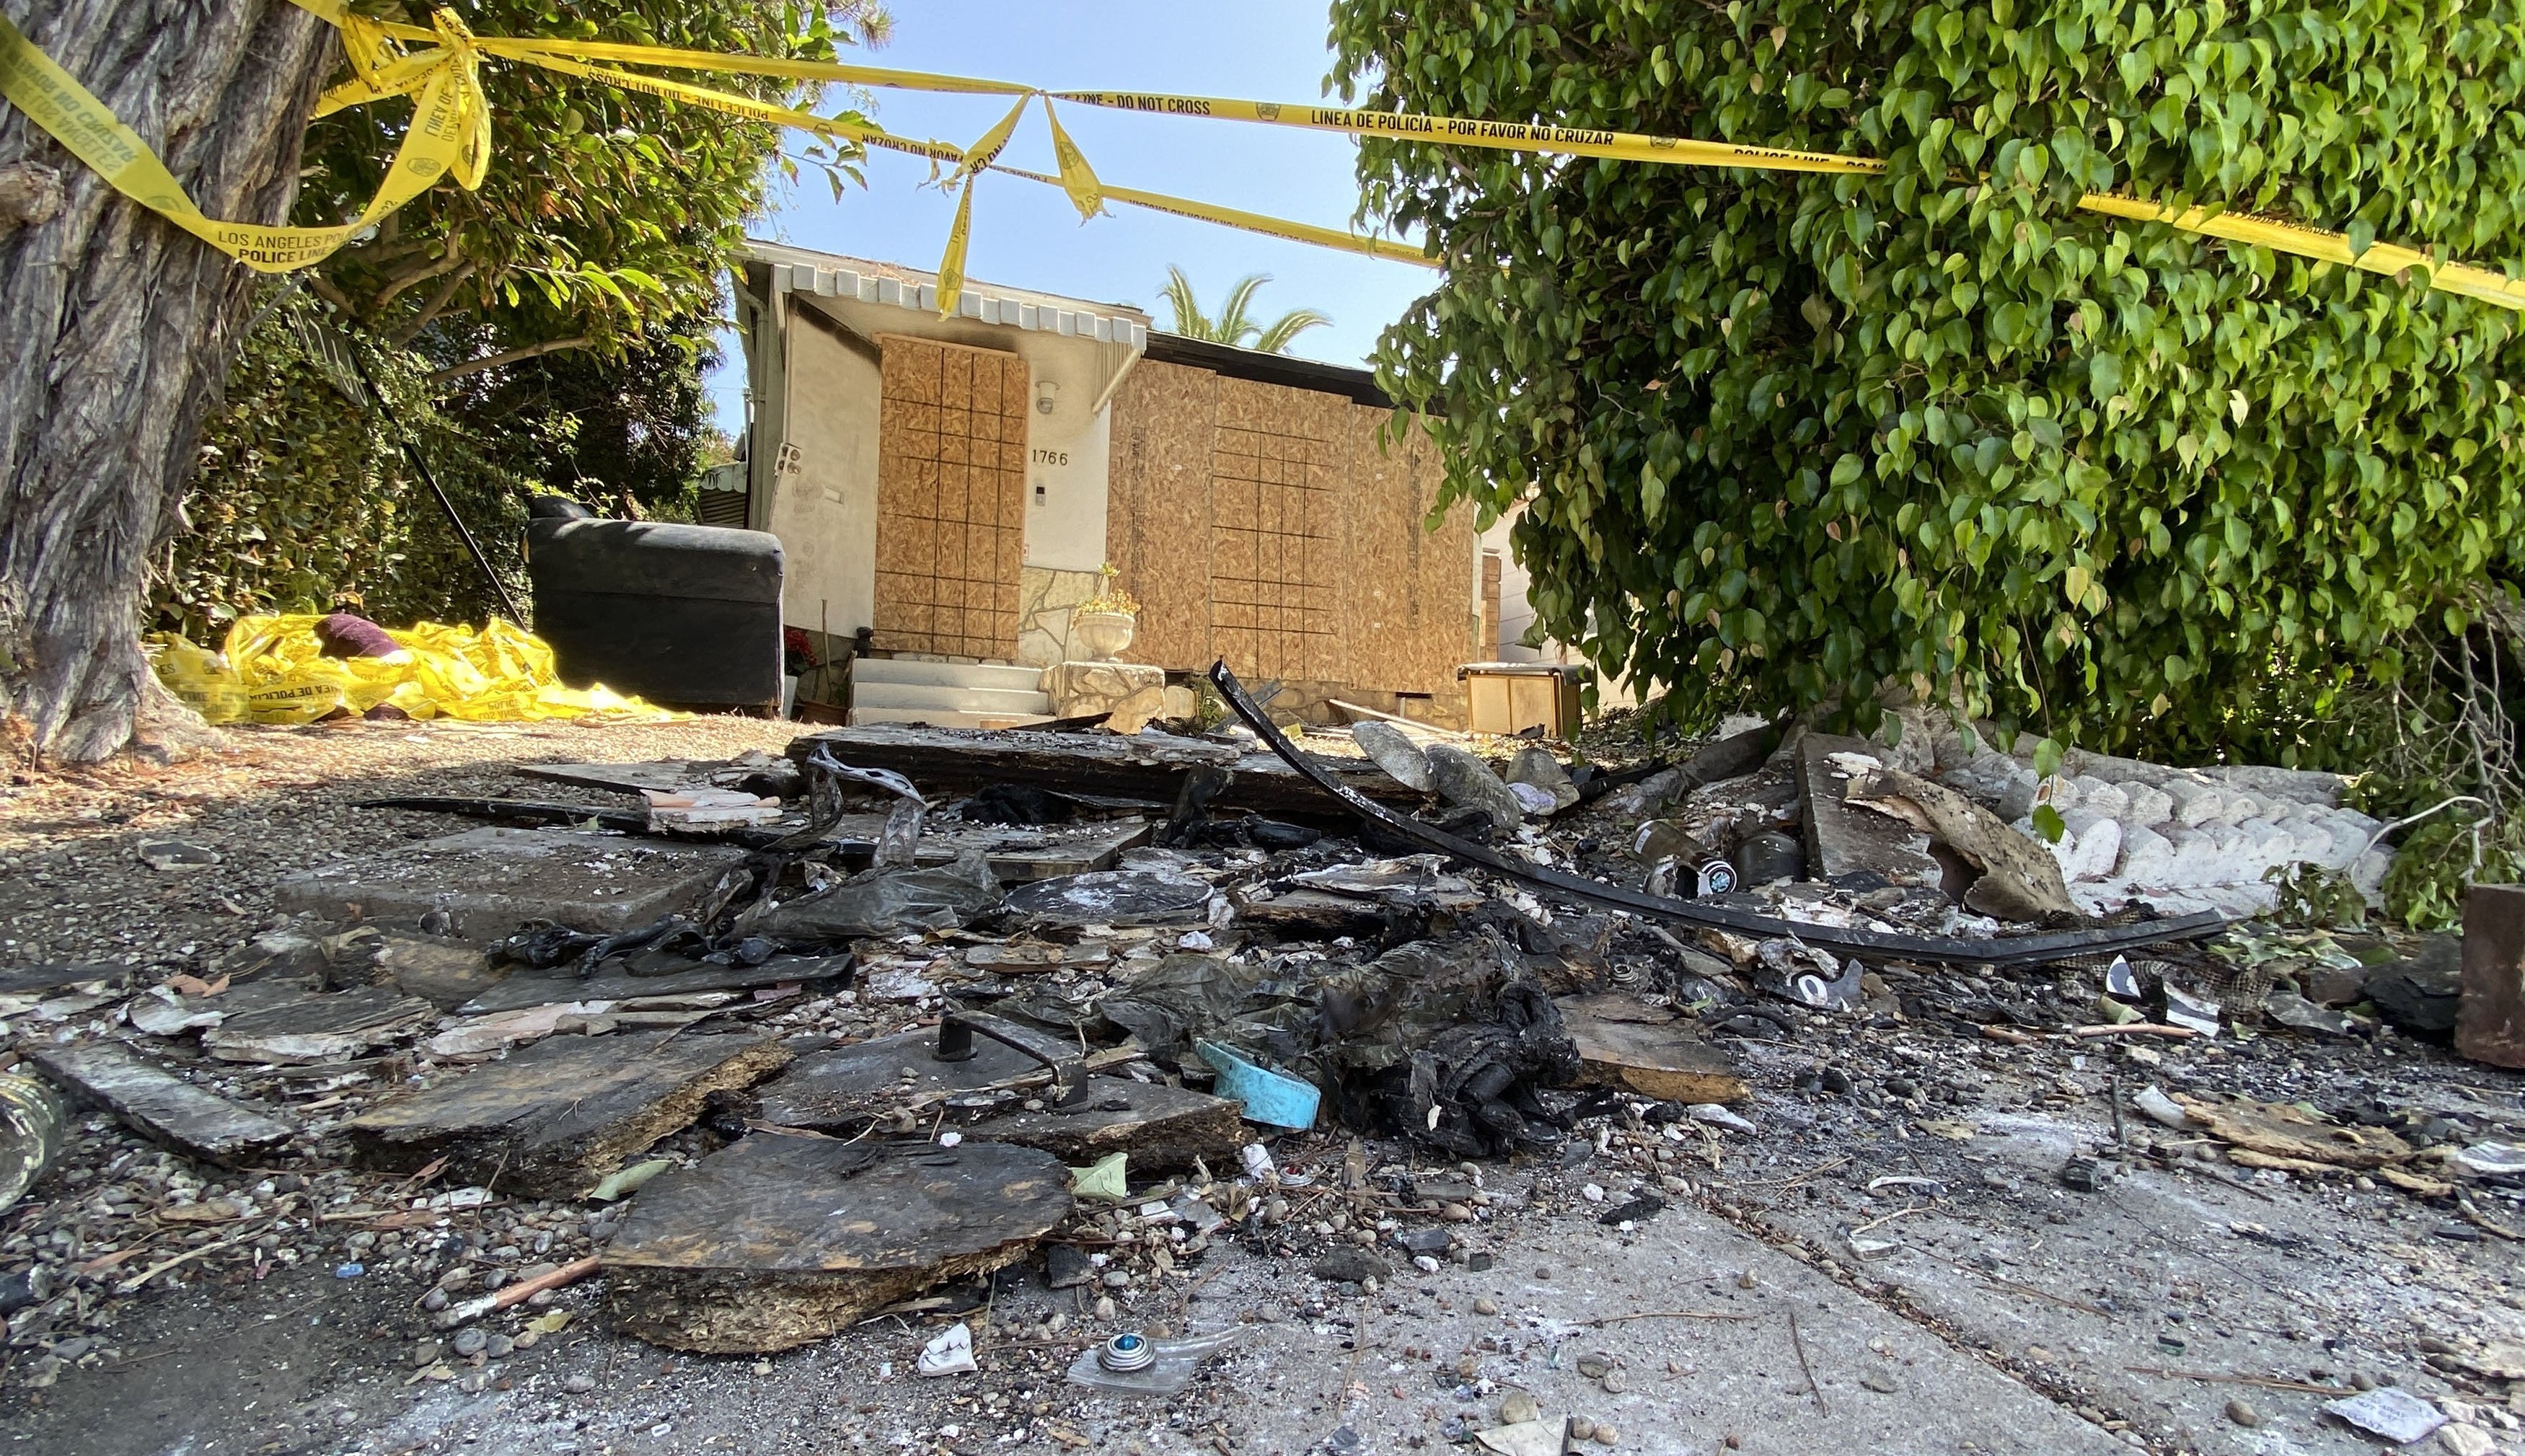 Charred debris and caution tape are seen at the site where US actress Anne Heche crashed into a home in Mar Vista, California on August 8, 2022 | Source: Getty Images 